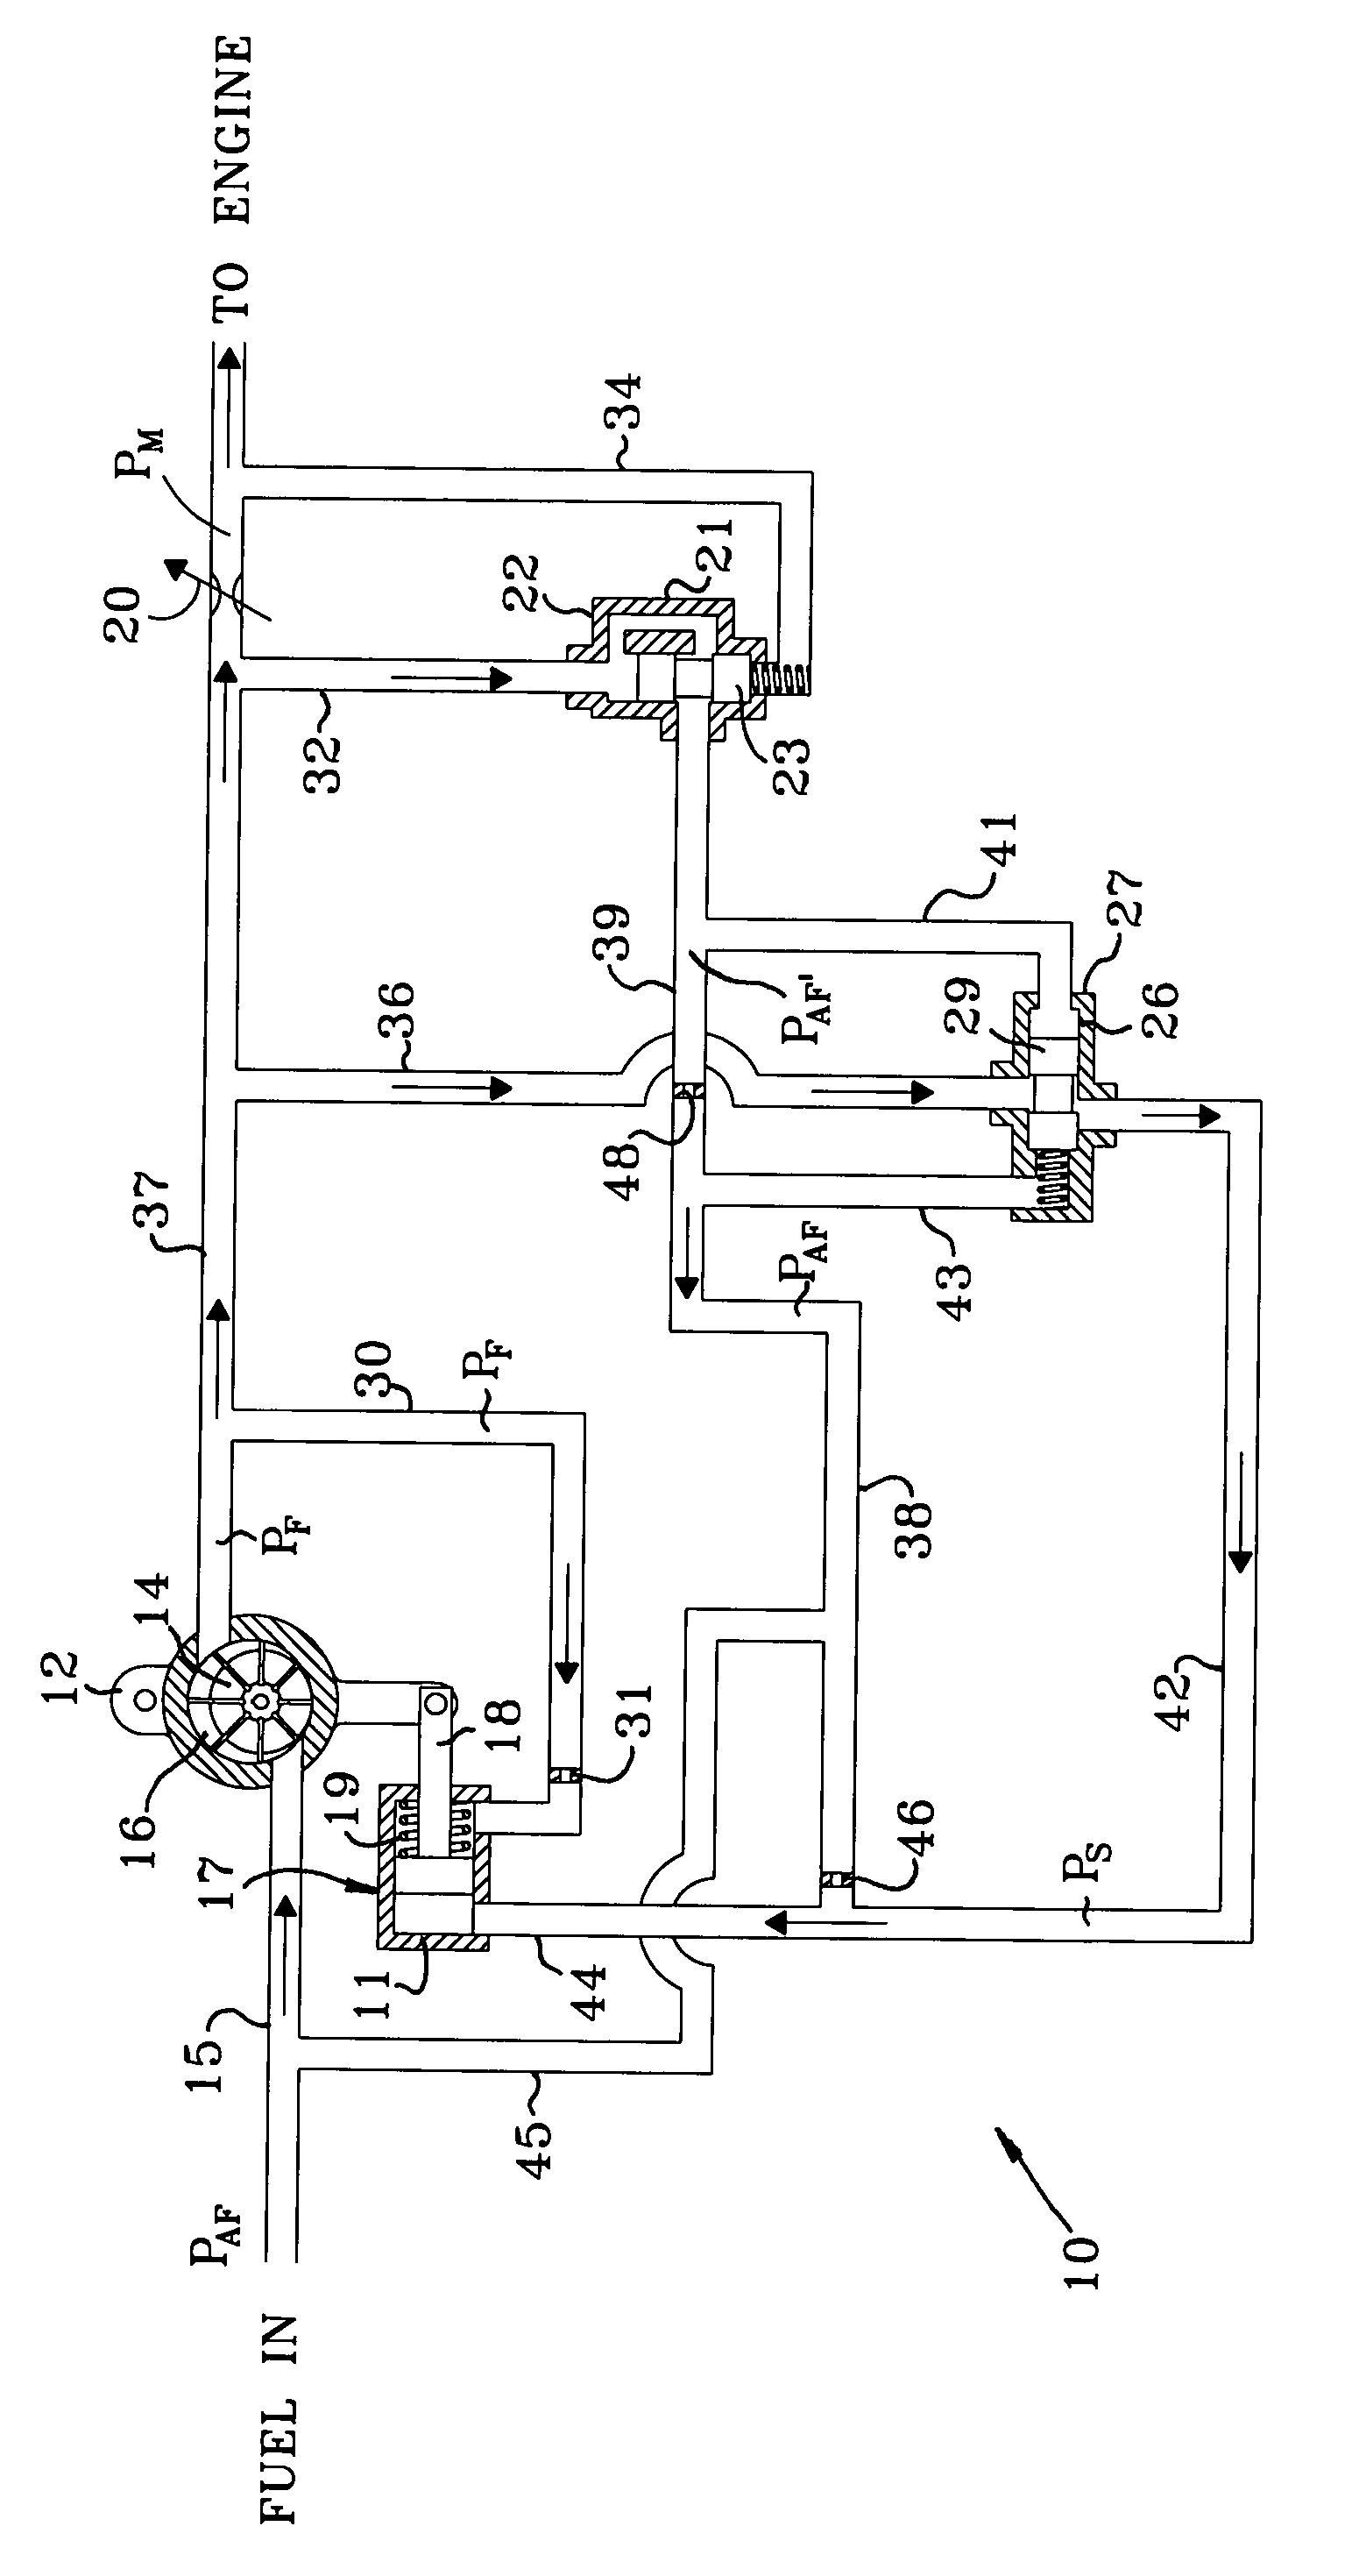 Constant bypass flow controller for a variable displacement pump